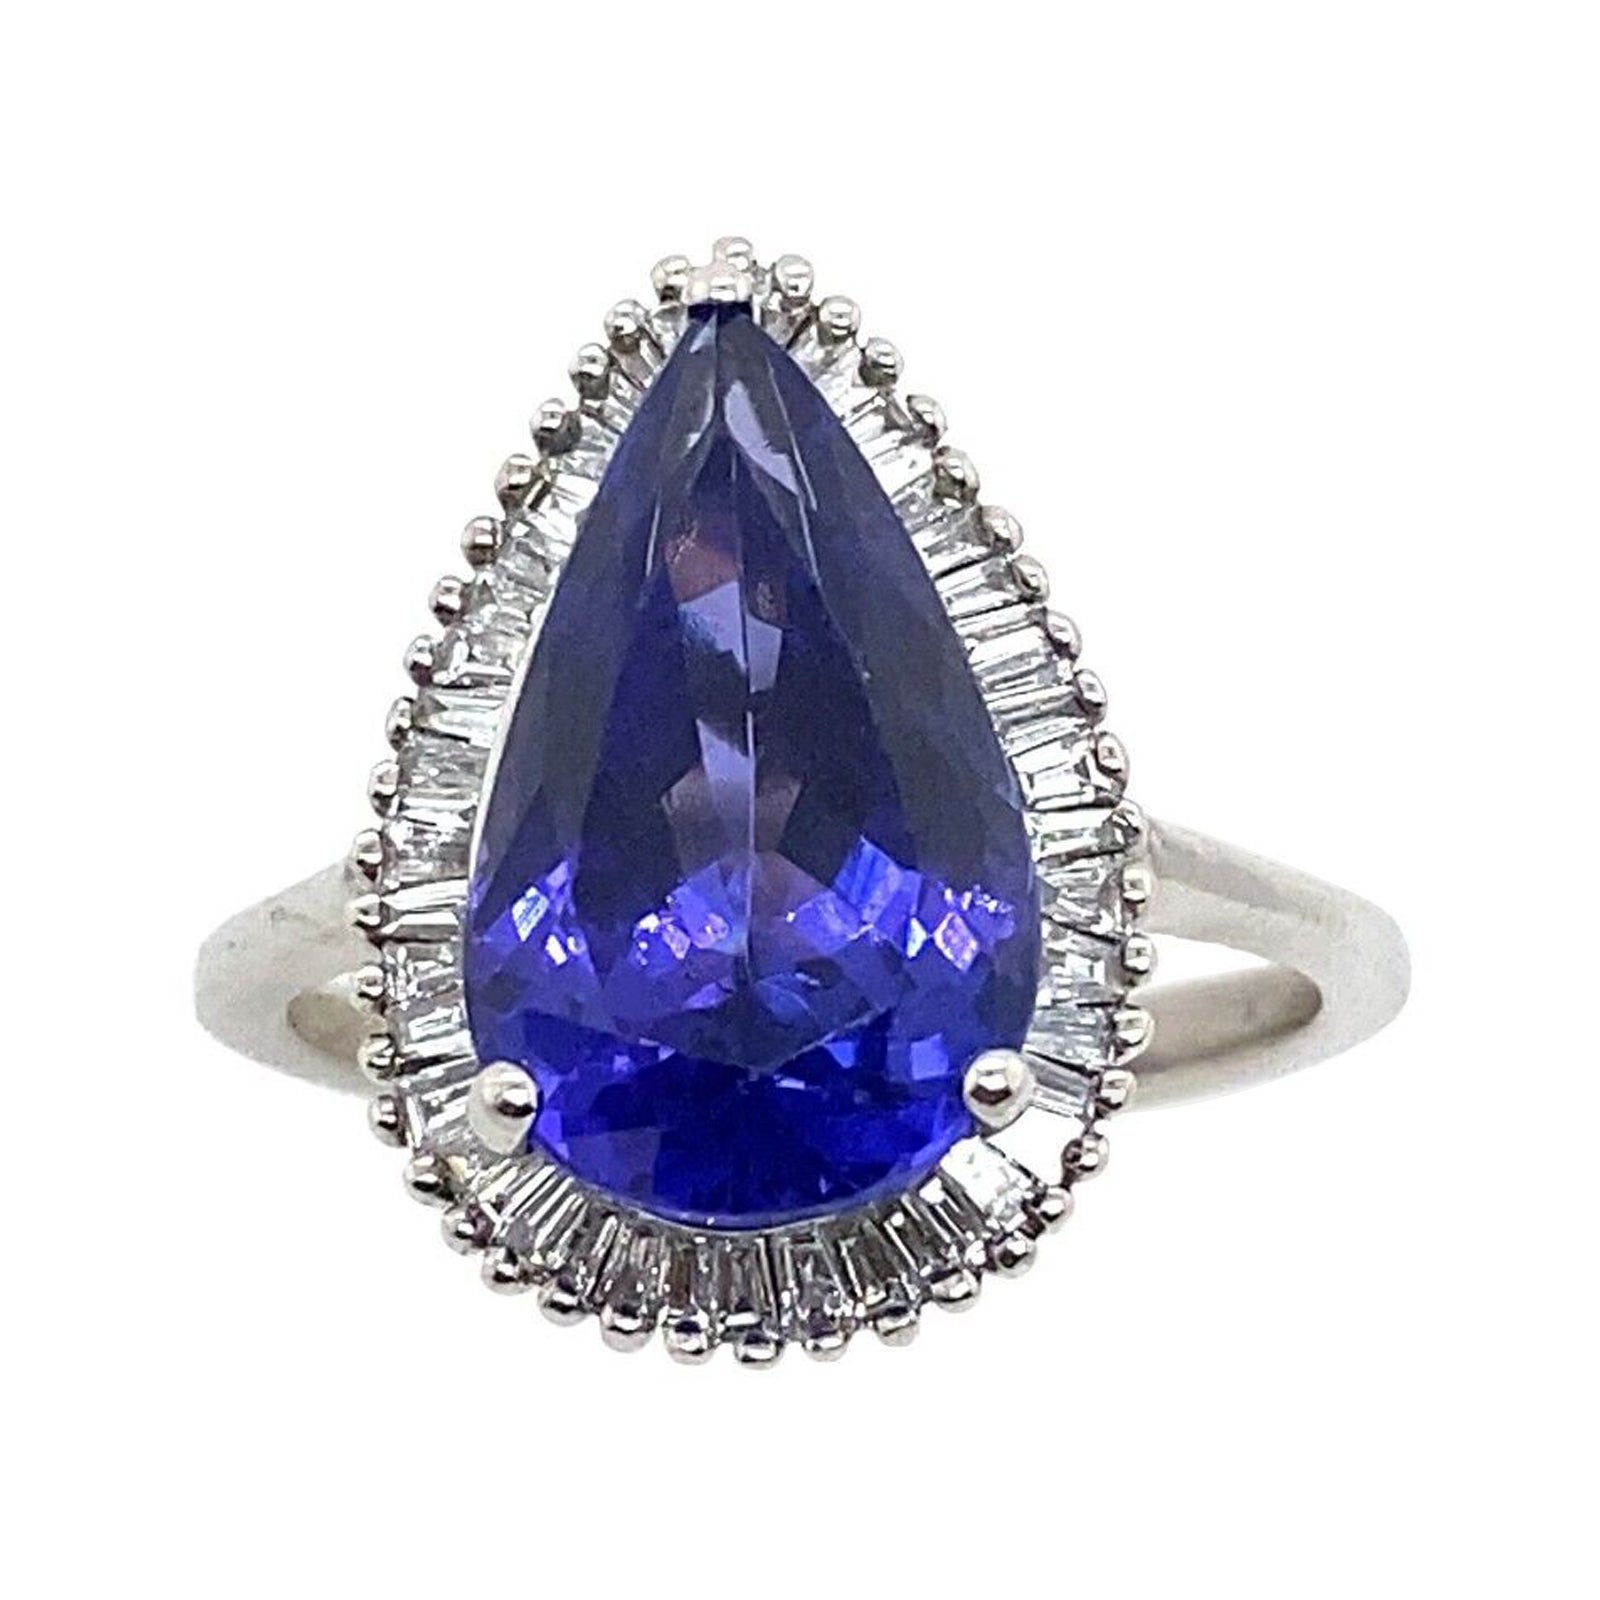 4.85ct Pear Shape Natural Tanzanite Surrounded by 0.42ct of Diamonds Ring For Sale